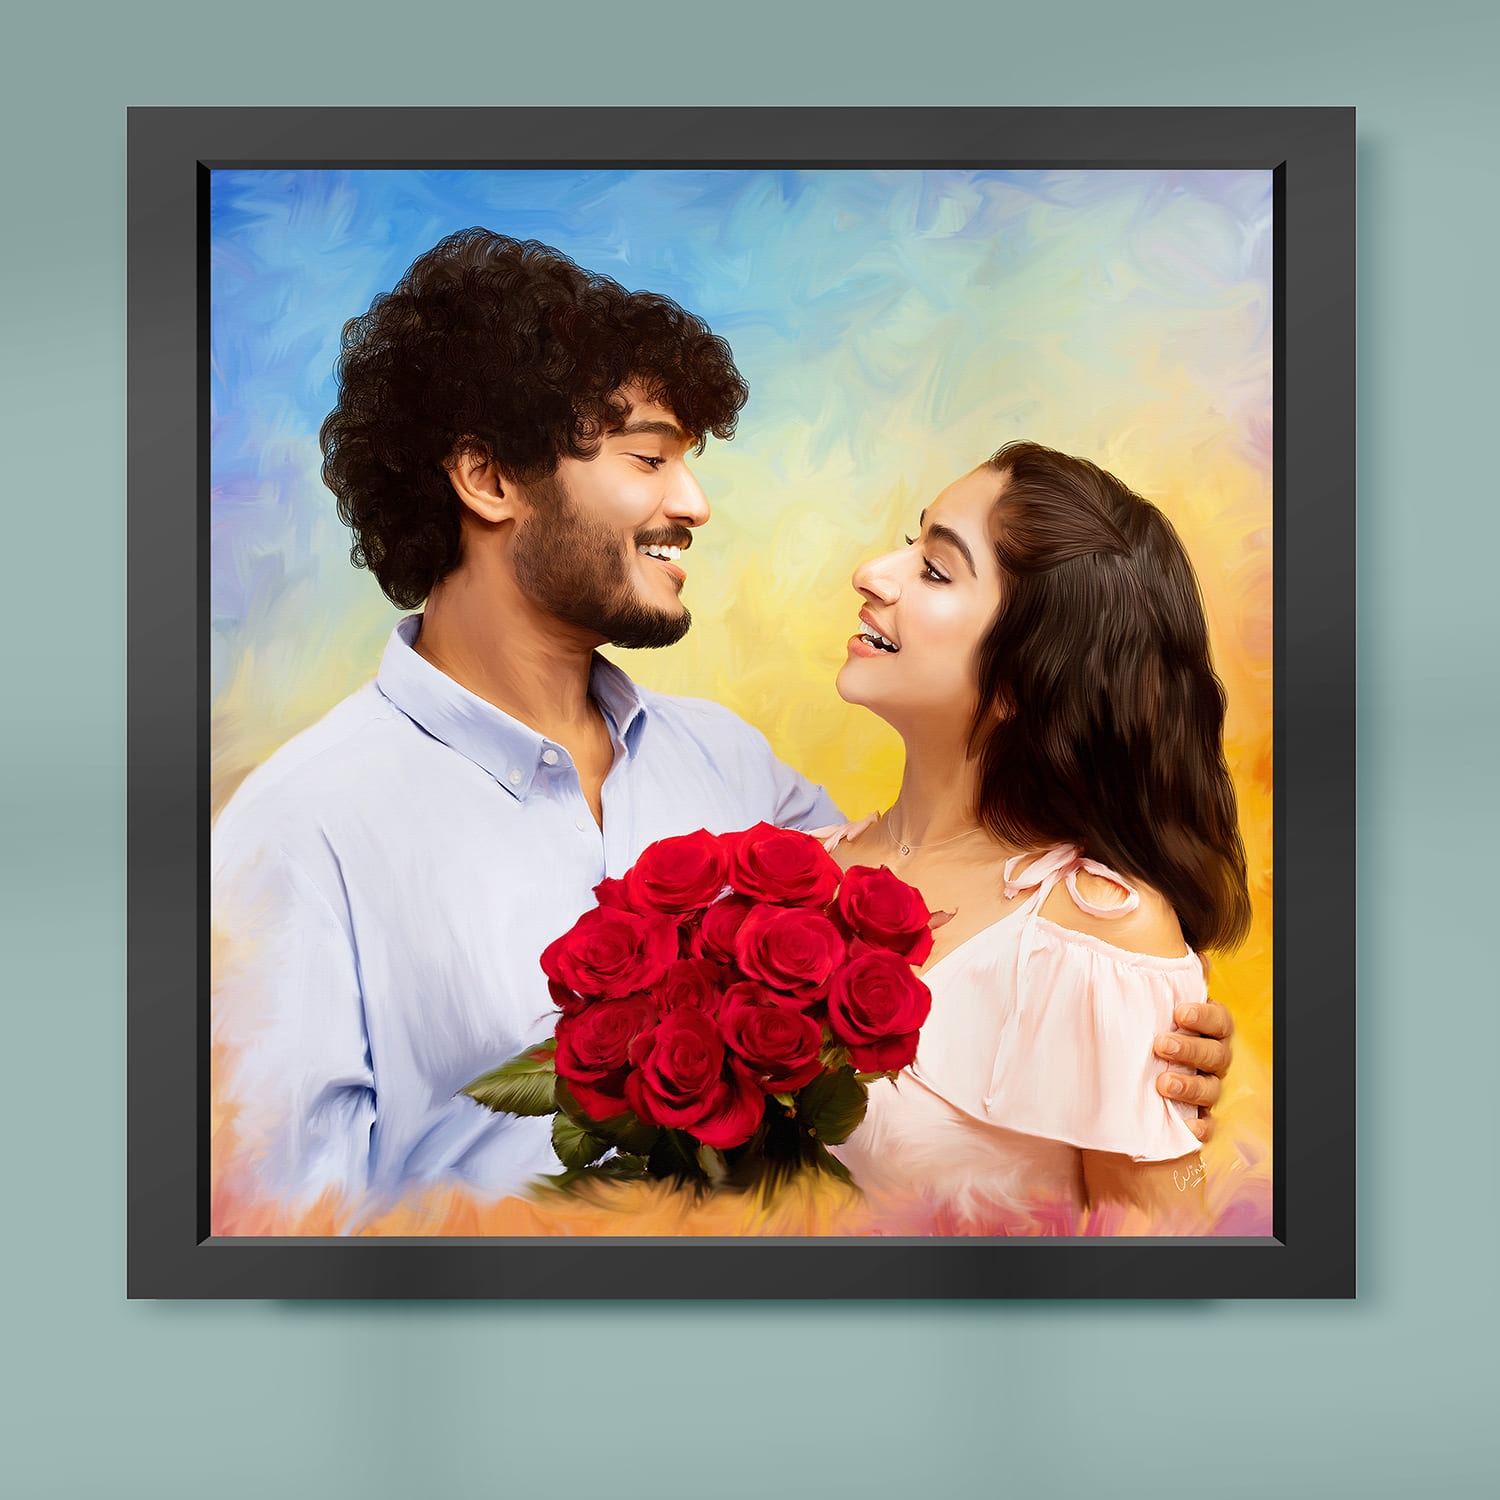 Buy Wedding Gifts for Couple Personalized Wedding Gift for Couple Oil  Painting Wedding Gifts Personalized Unique Wedding Gift Wedding Gift Ideas  Online in India - Etsy